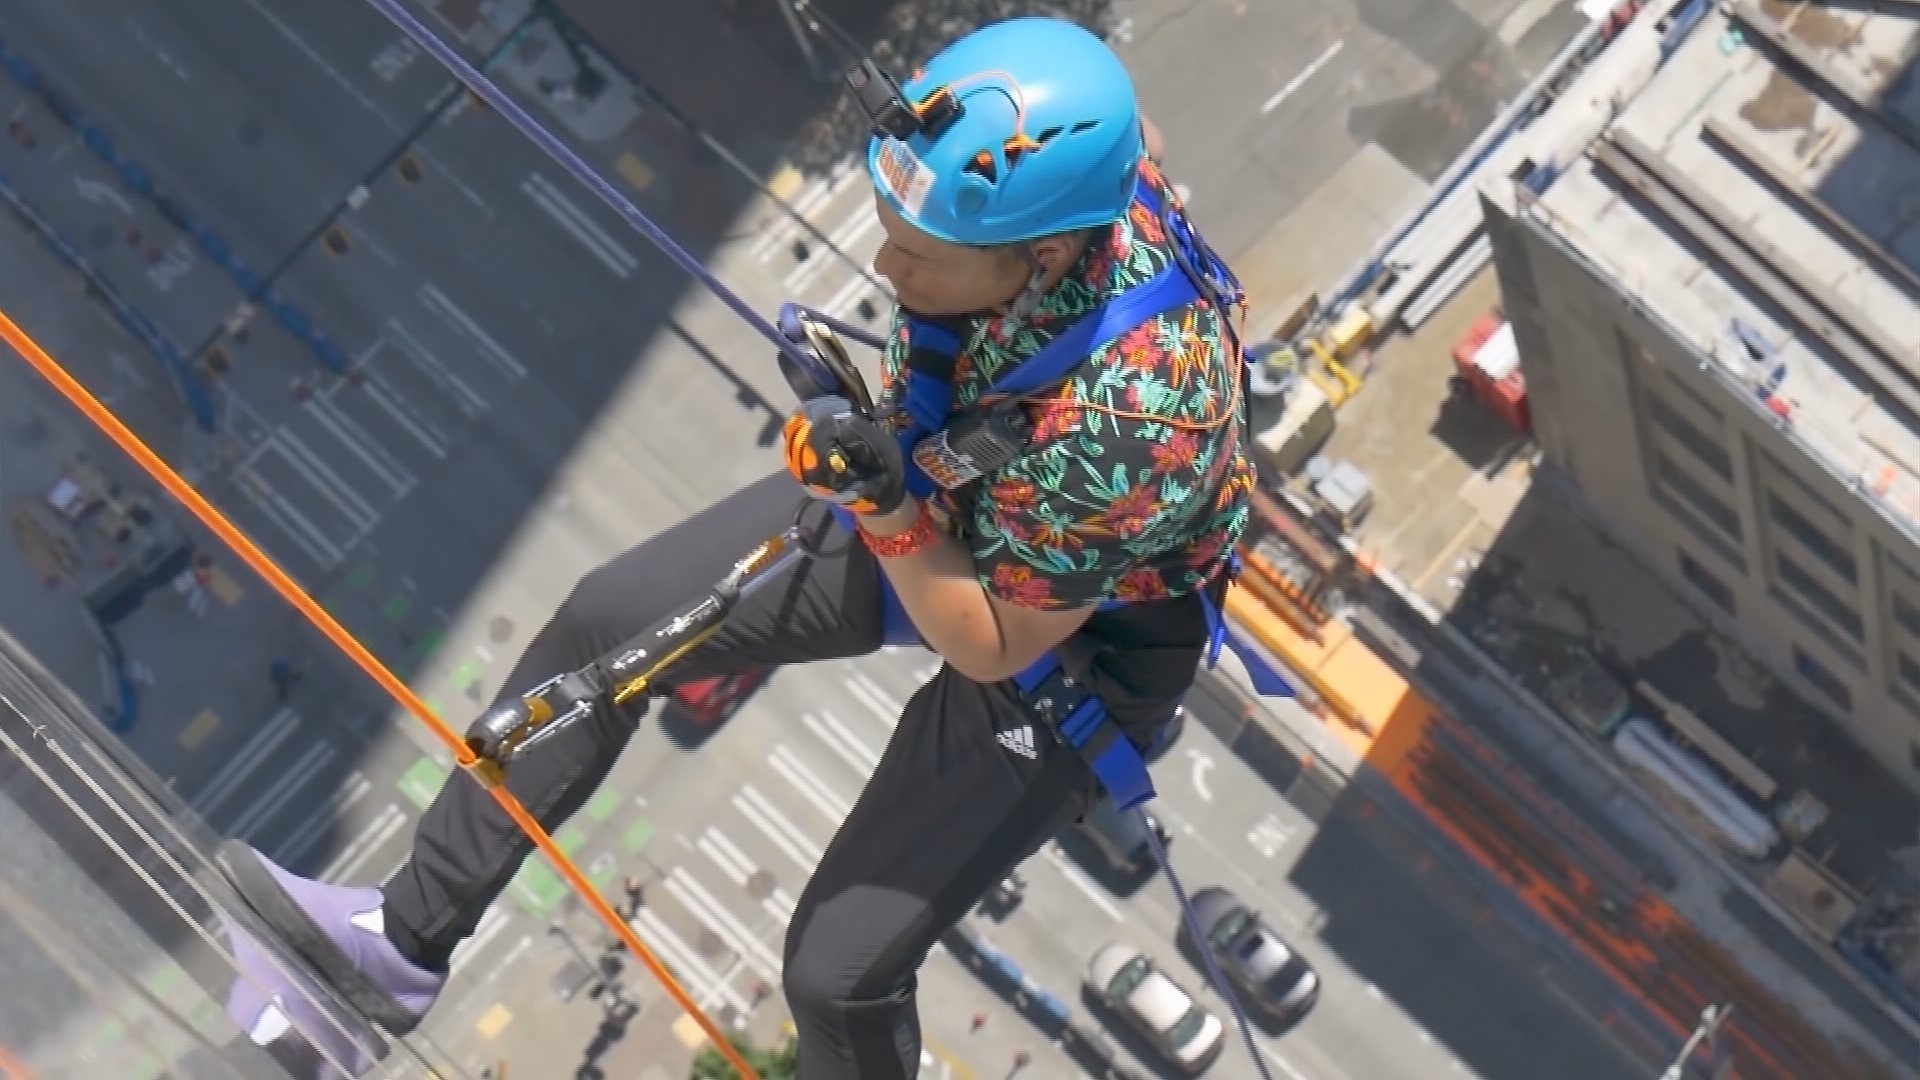 One of the Seattle Humane Society's biggest fundraising events encouraged thrill-seekers to go over the edge of a 40 story building